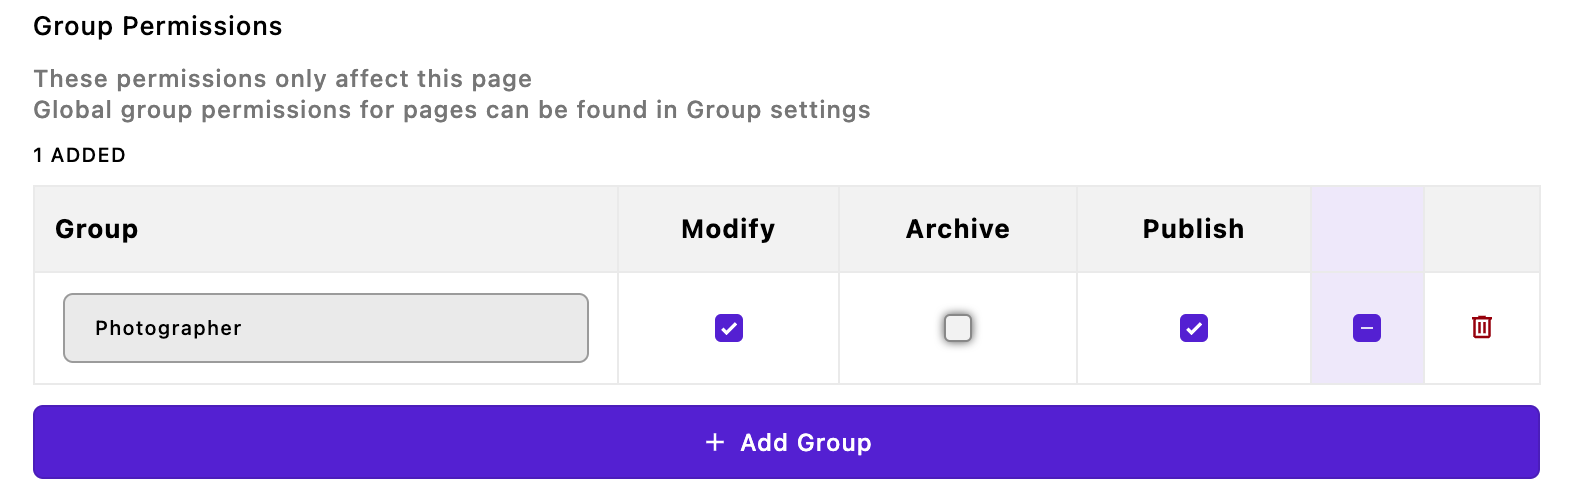 Adding group permissions